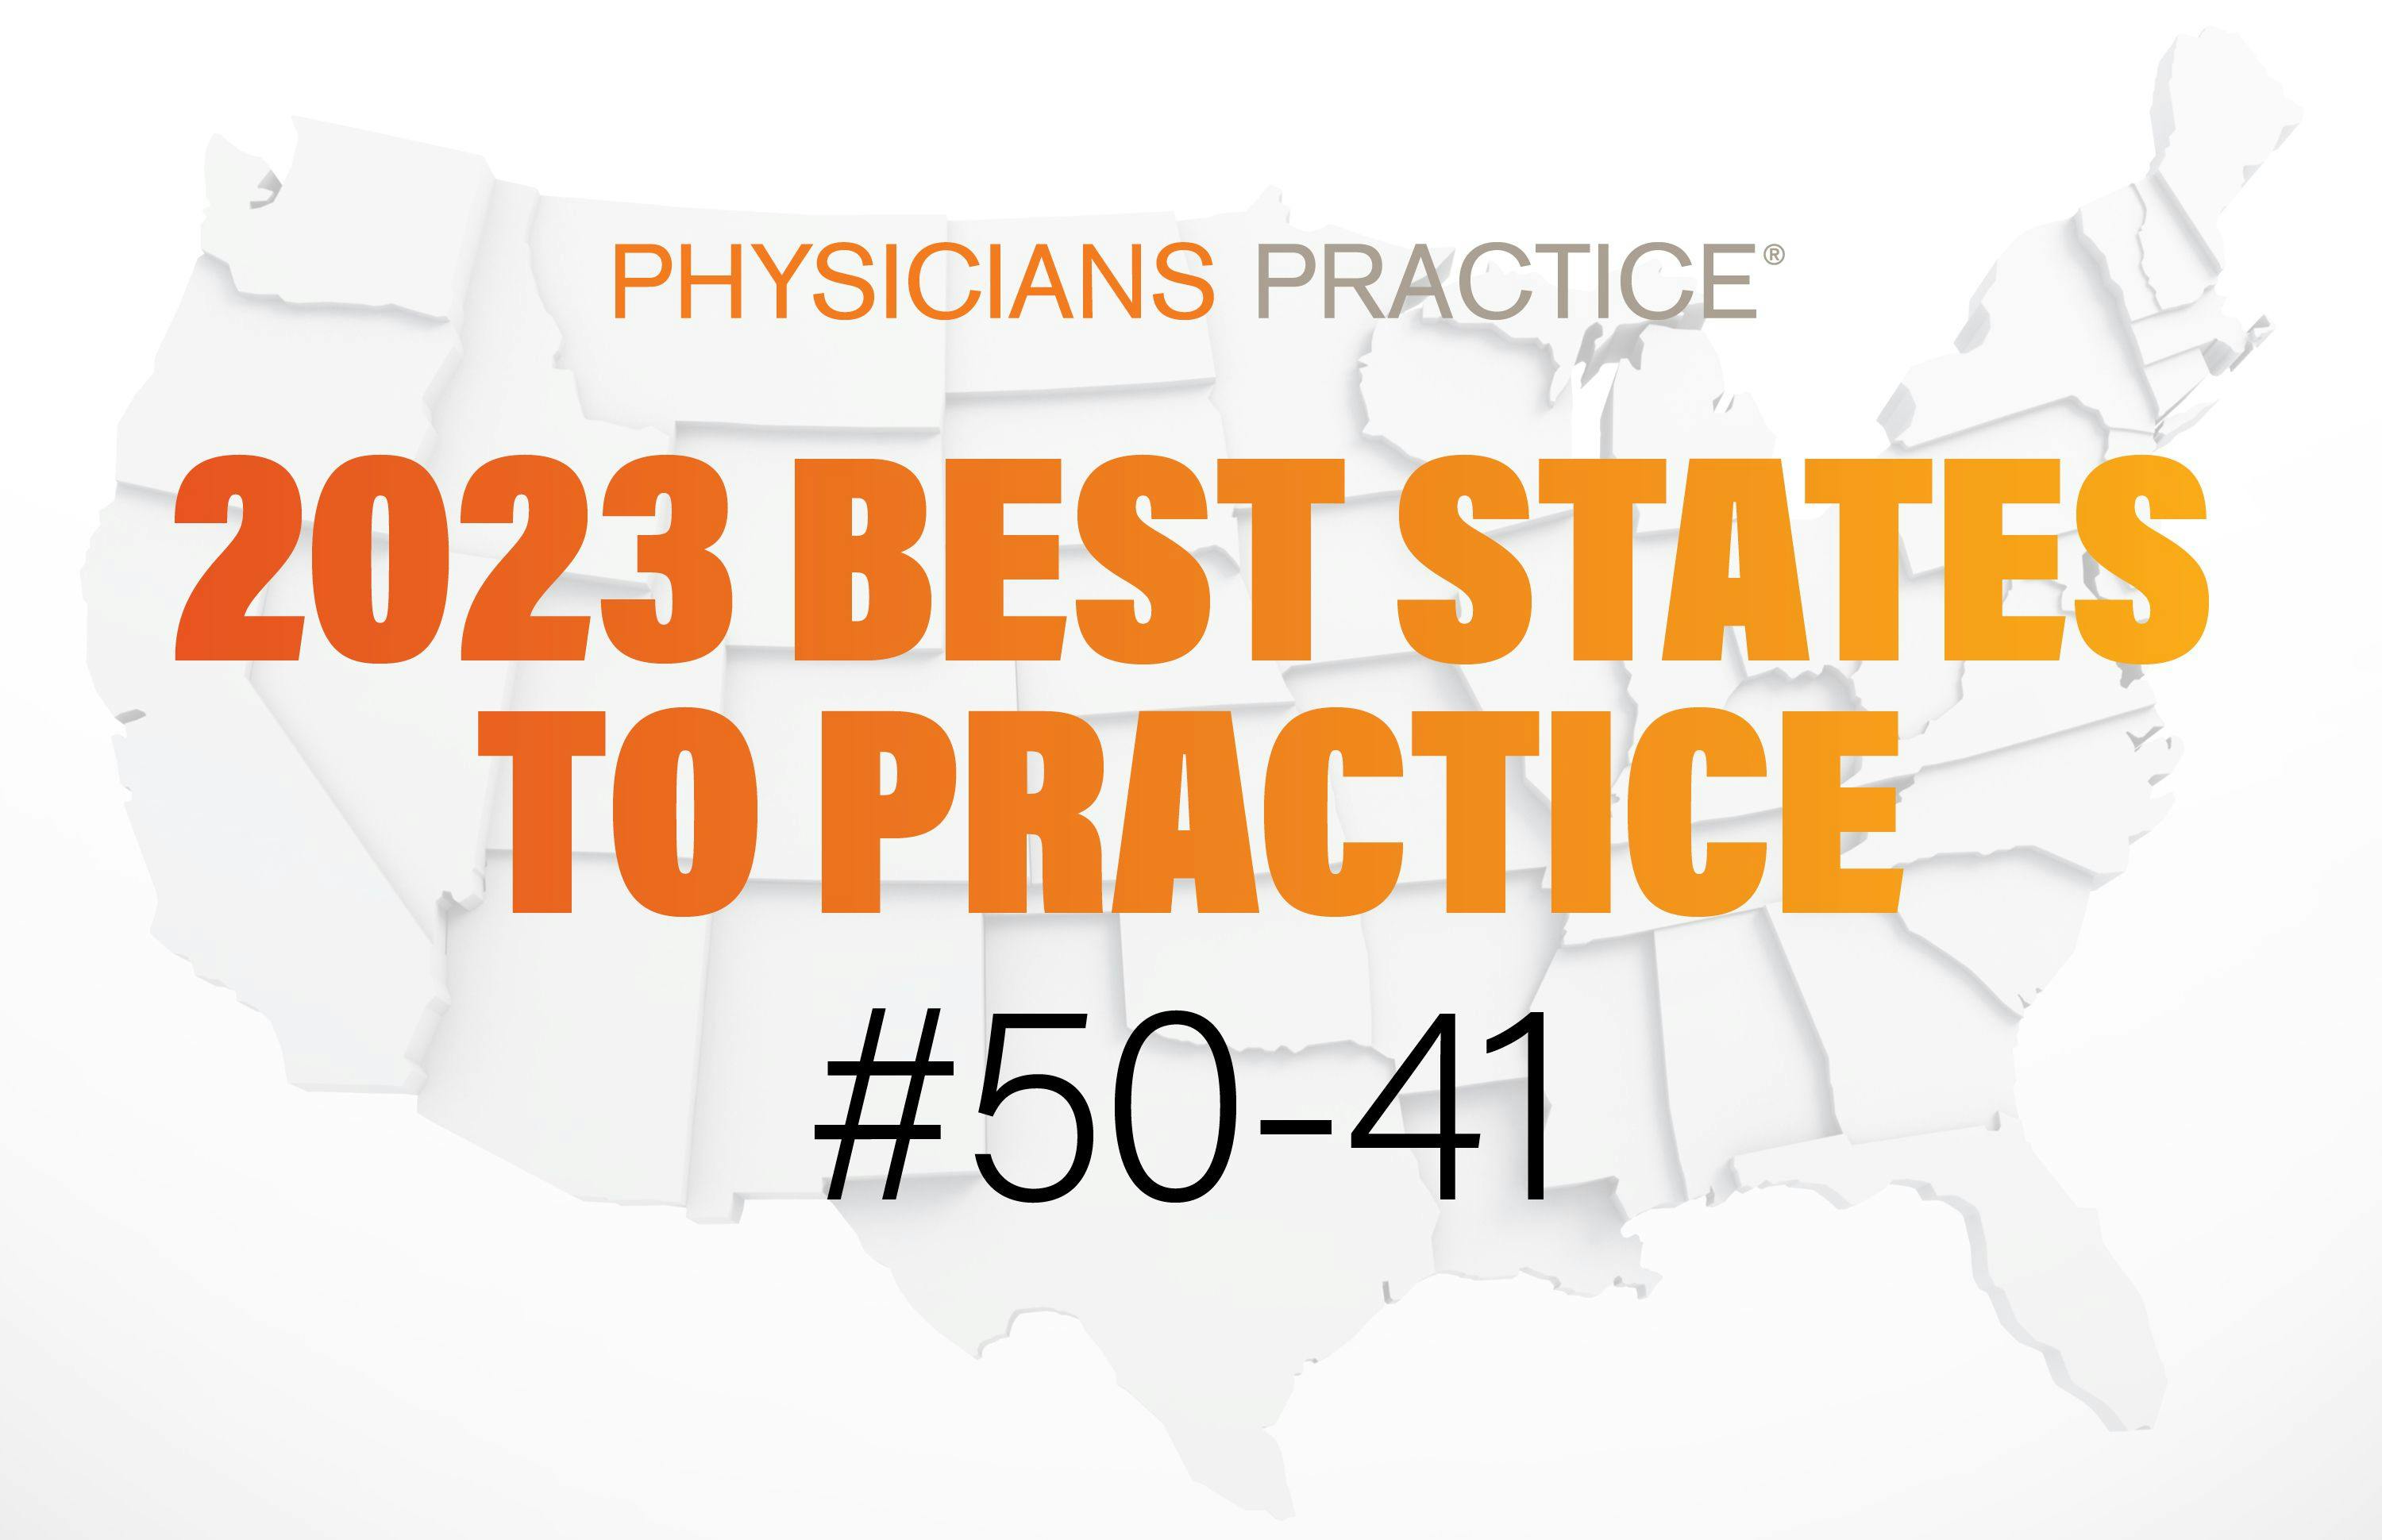 2023 Physicians Practice definitive best states for doctors: 50-41